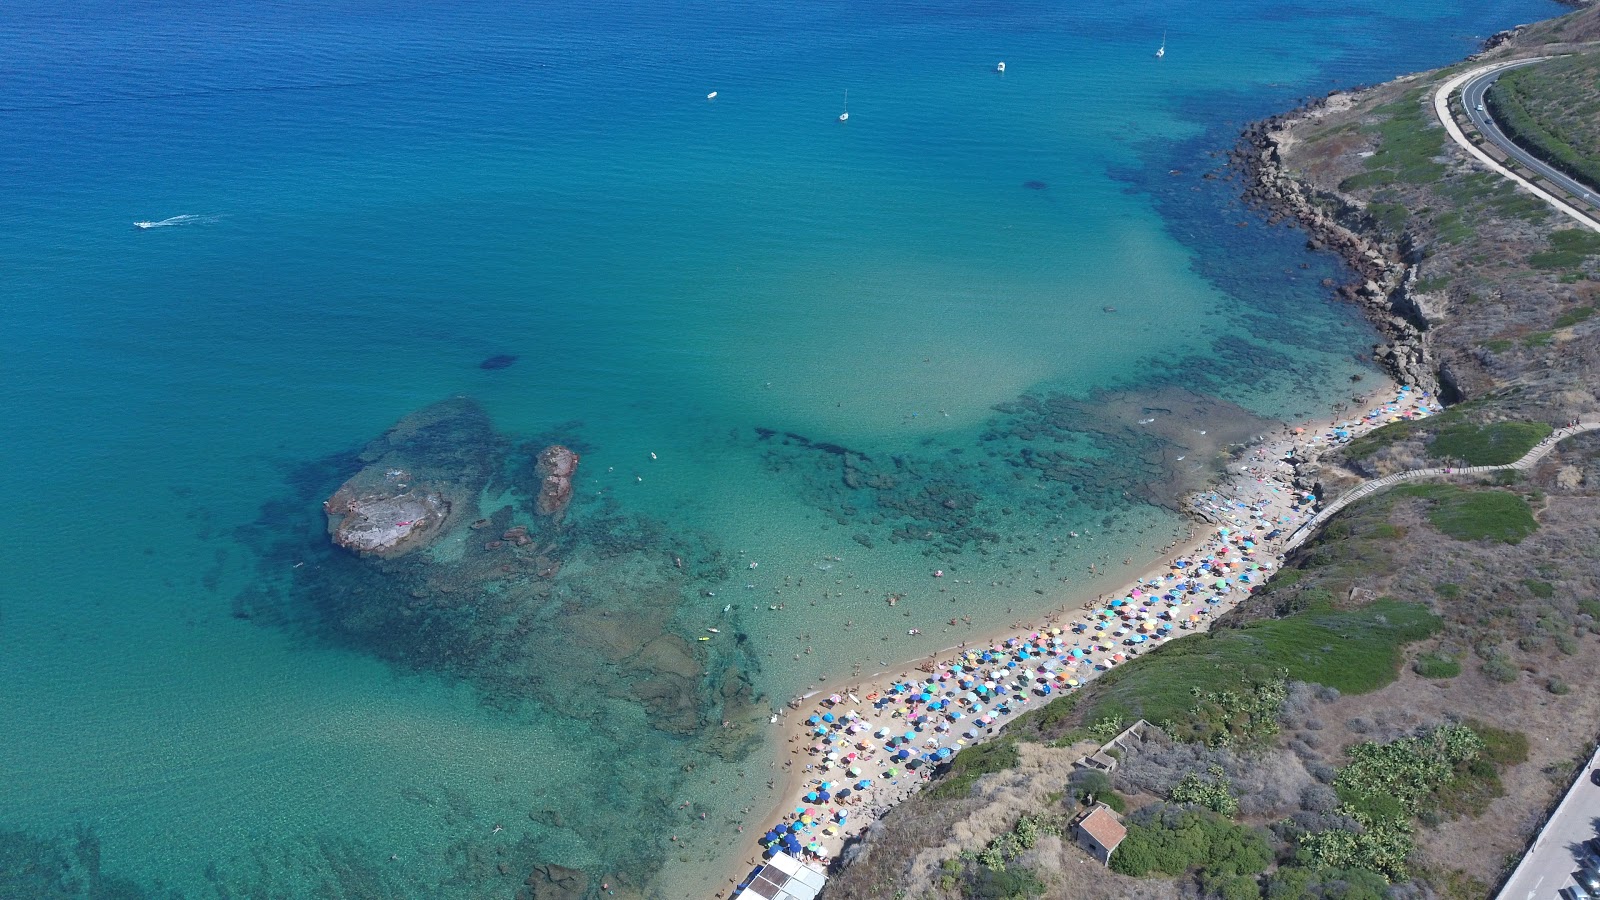 Photo of Spiaggia di Ampurias with turquoise pure water surface